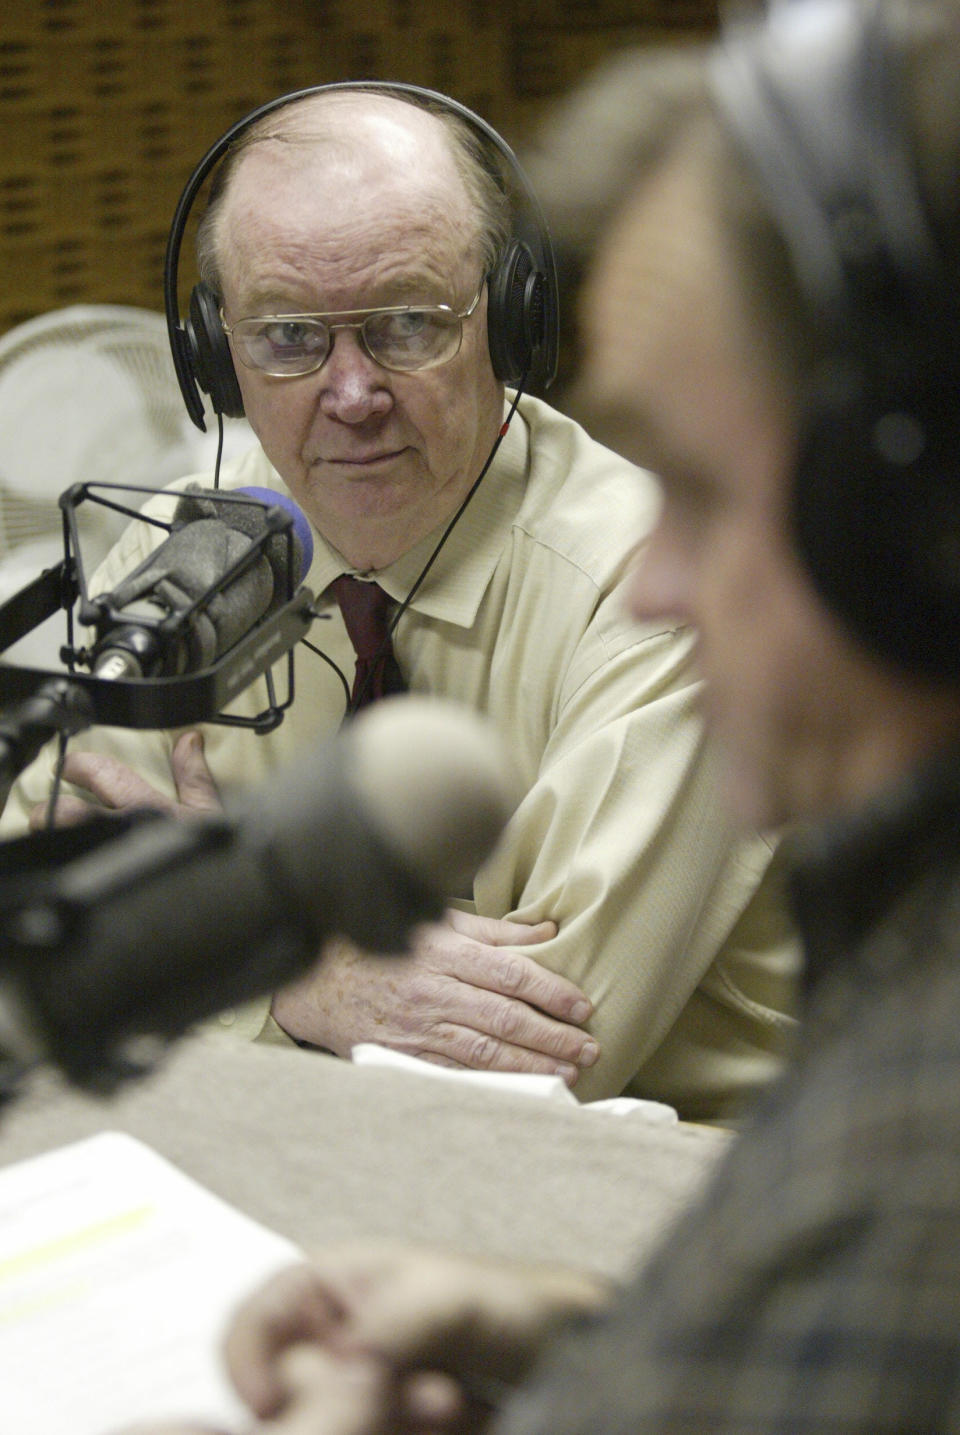 American Family Radio's Don Wildmon sits in a studio in Tupelo, Miss., March 18, 2005. Wildmon, the founder of the American Family Association, a conservative Christian advocacy group, has died, the organization announced Thursday. The 85-year-old Mississippi native died on Thursday from complications related to Lewy body dementia, an obituary published by WTVA-TV said. (Thomas Wells/The Northeast Mississippi Daily Journal via AP)